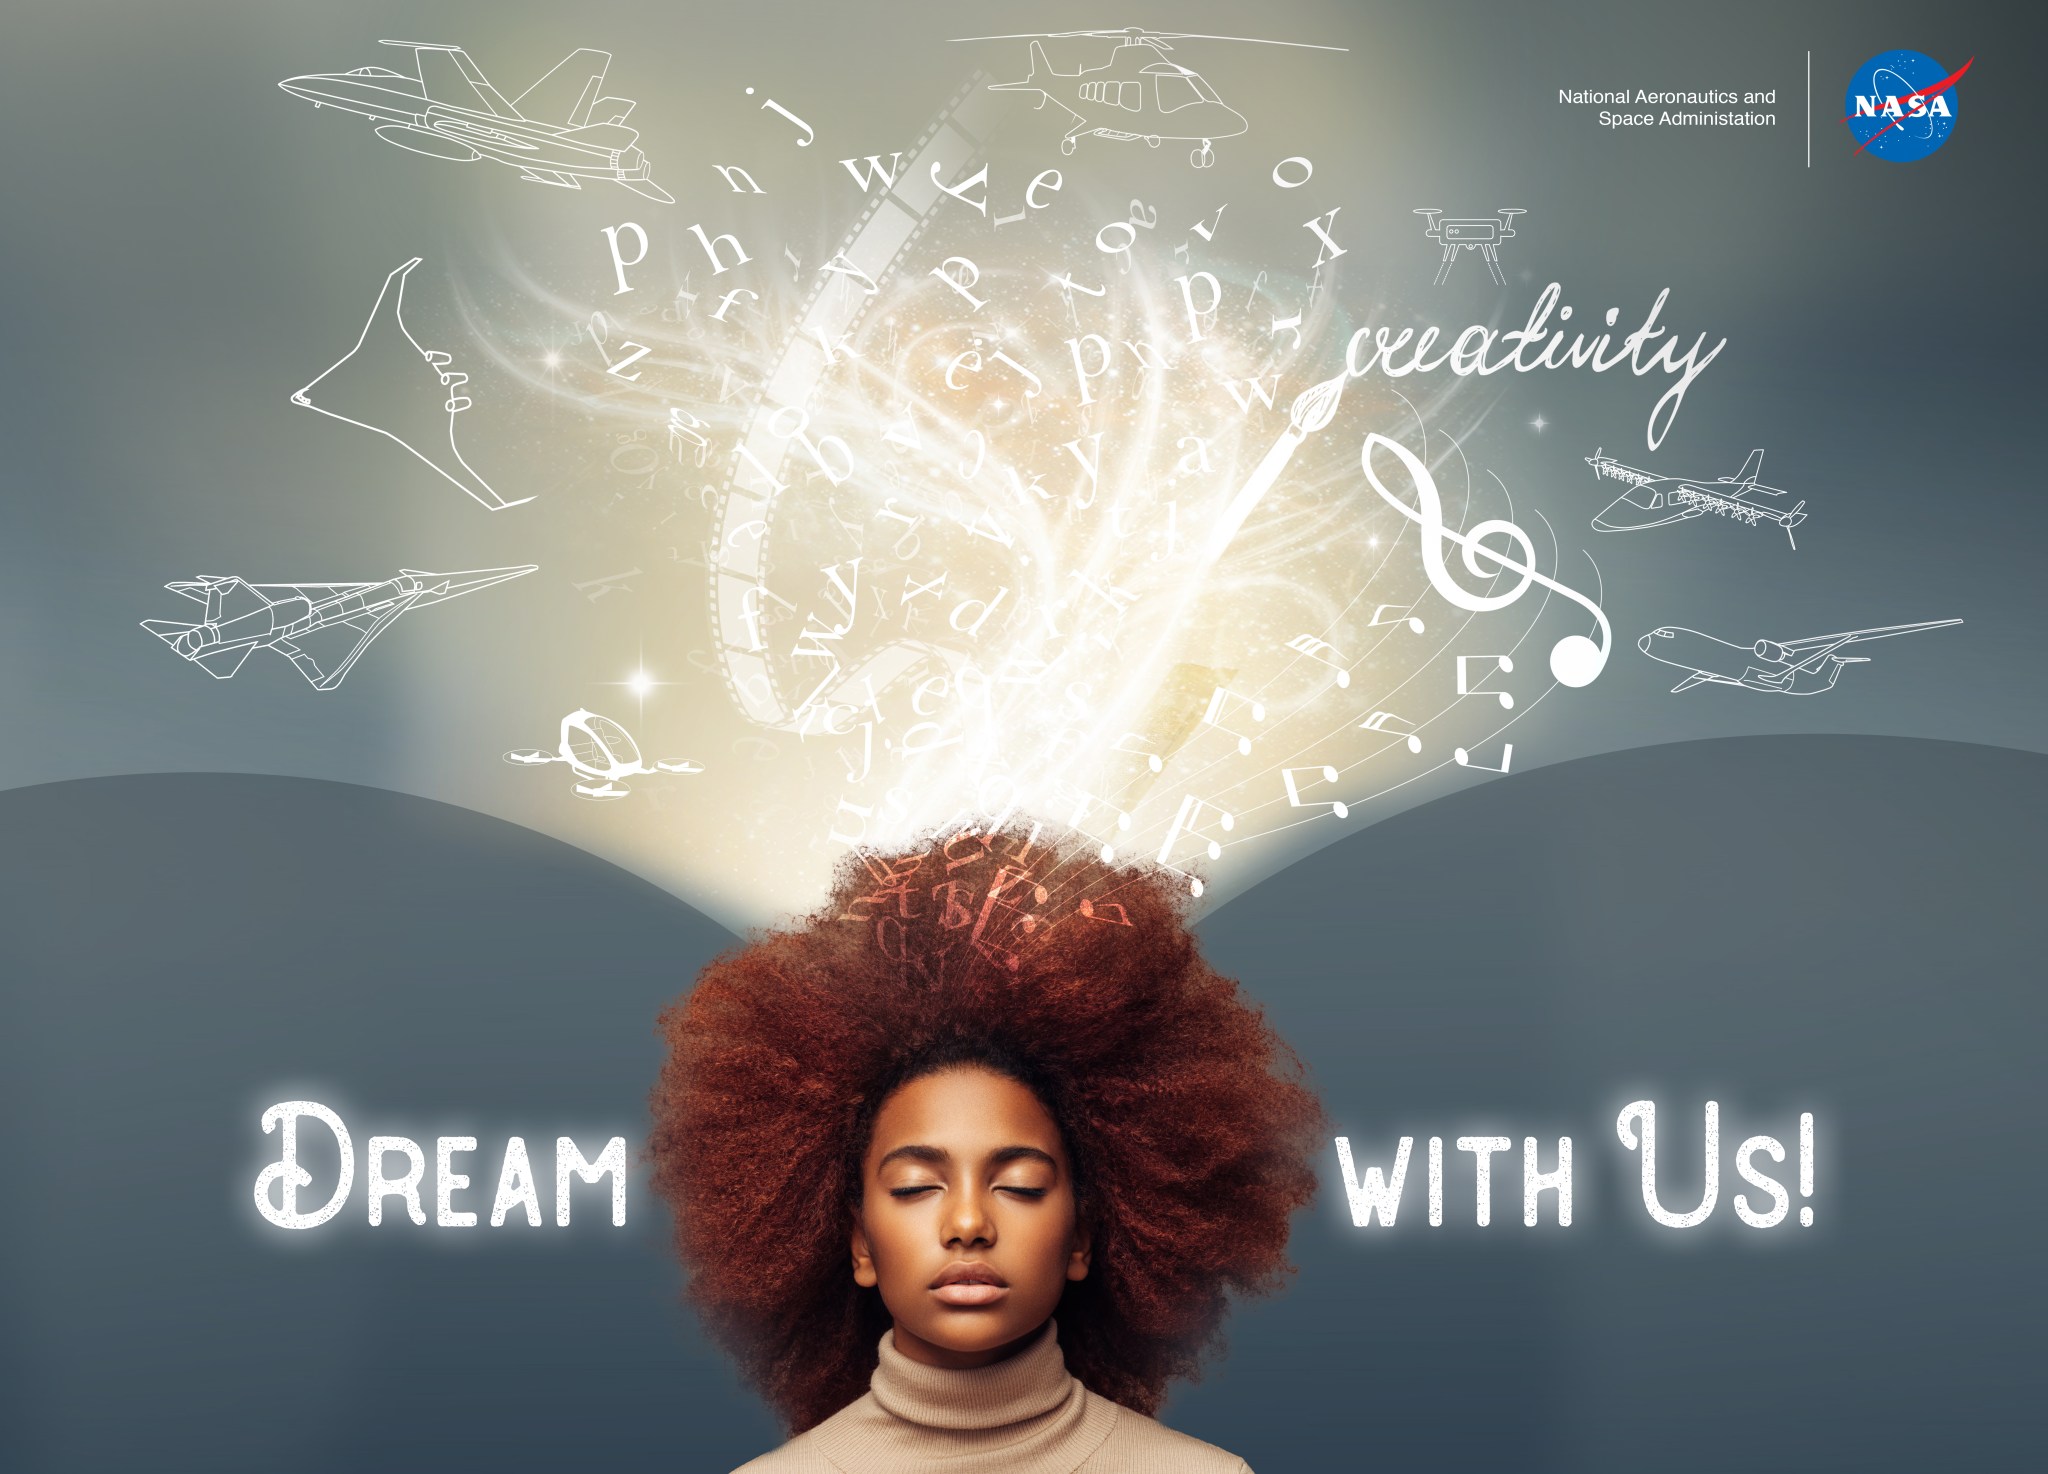 Dream with Us graphic, showing a female African American dreaming up aeronautics ideas.